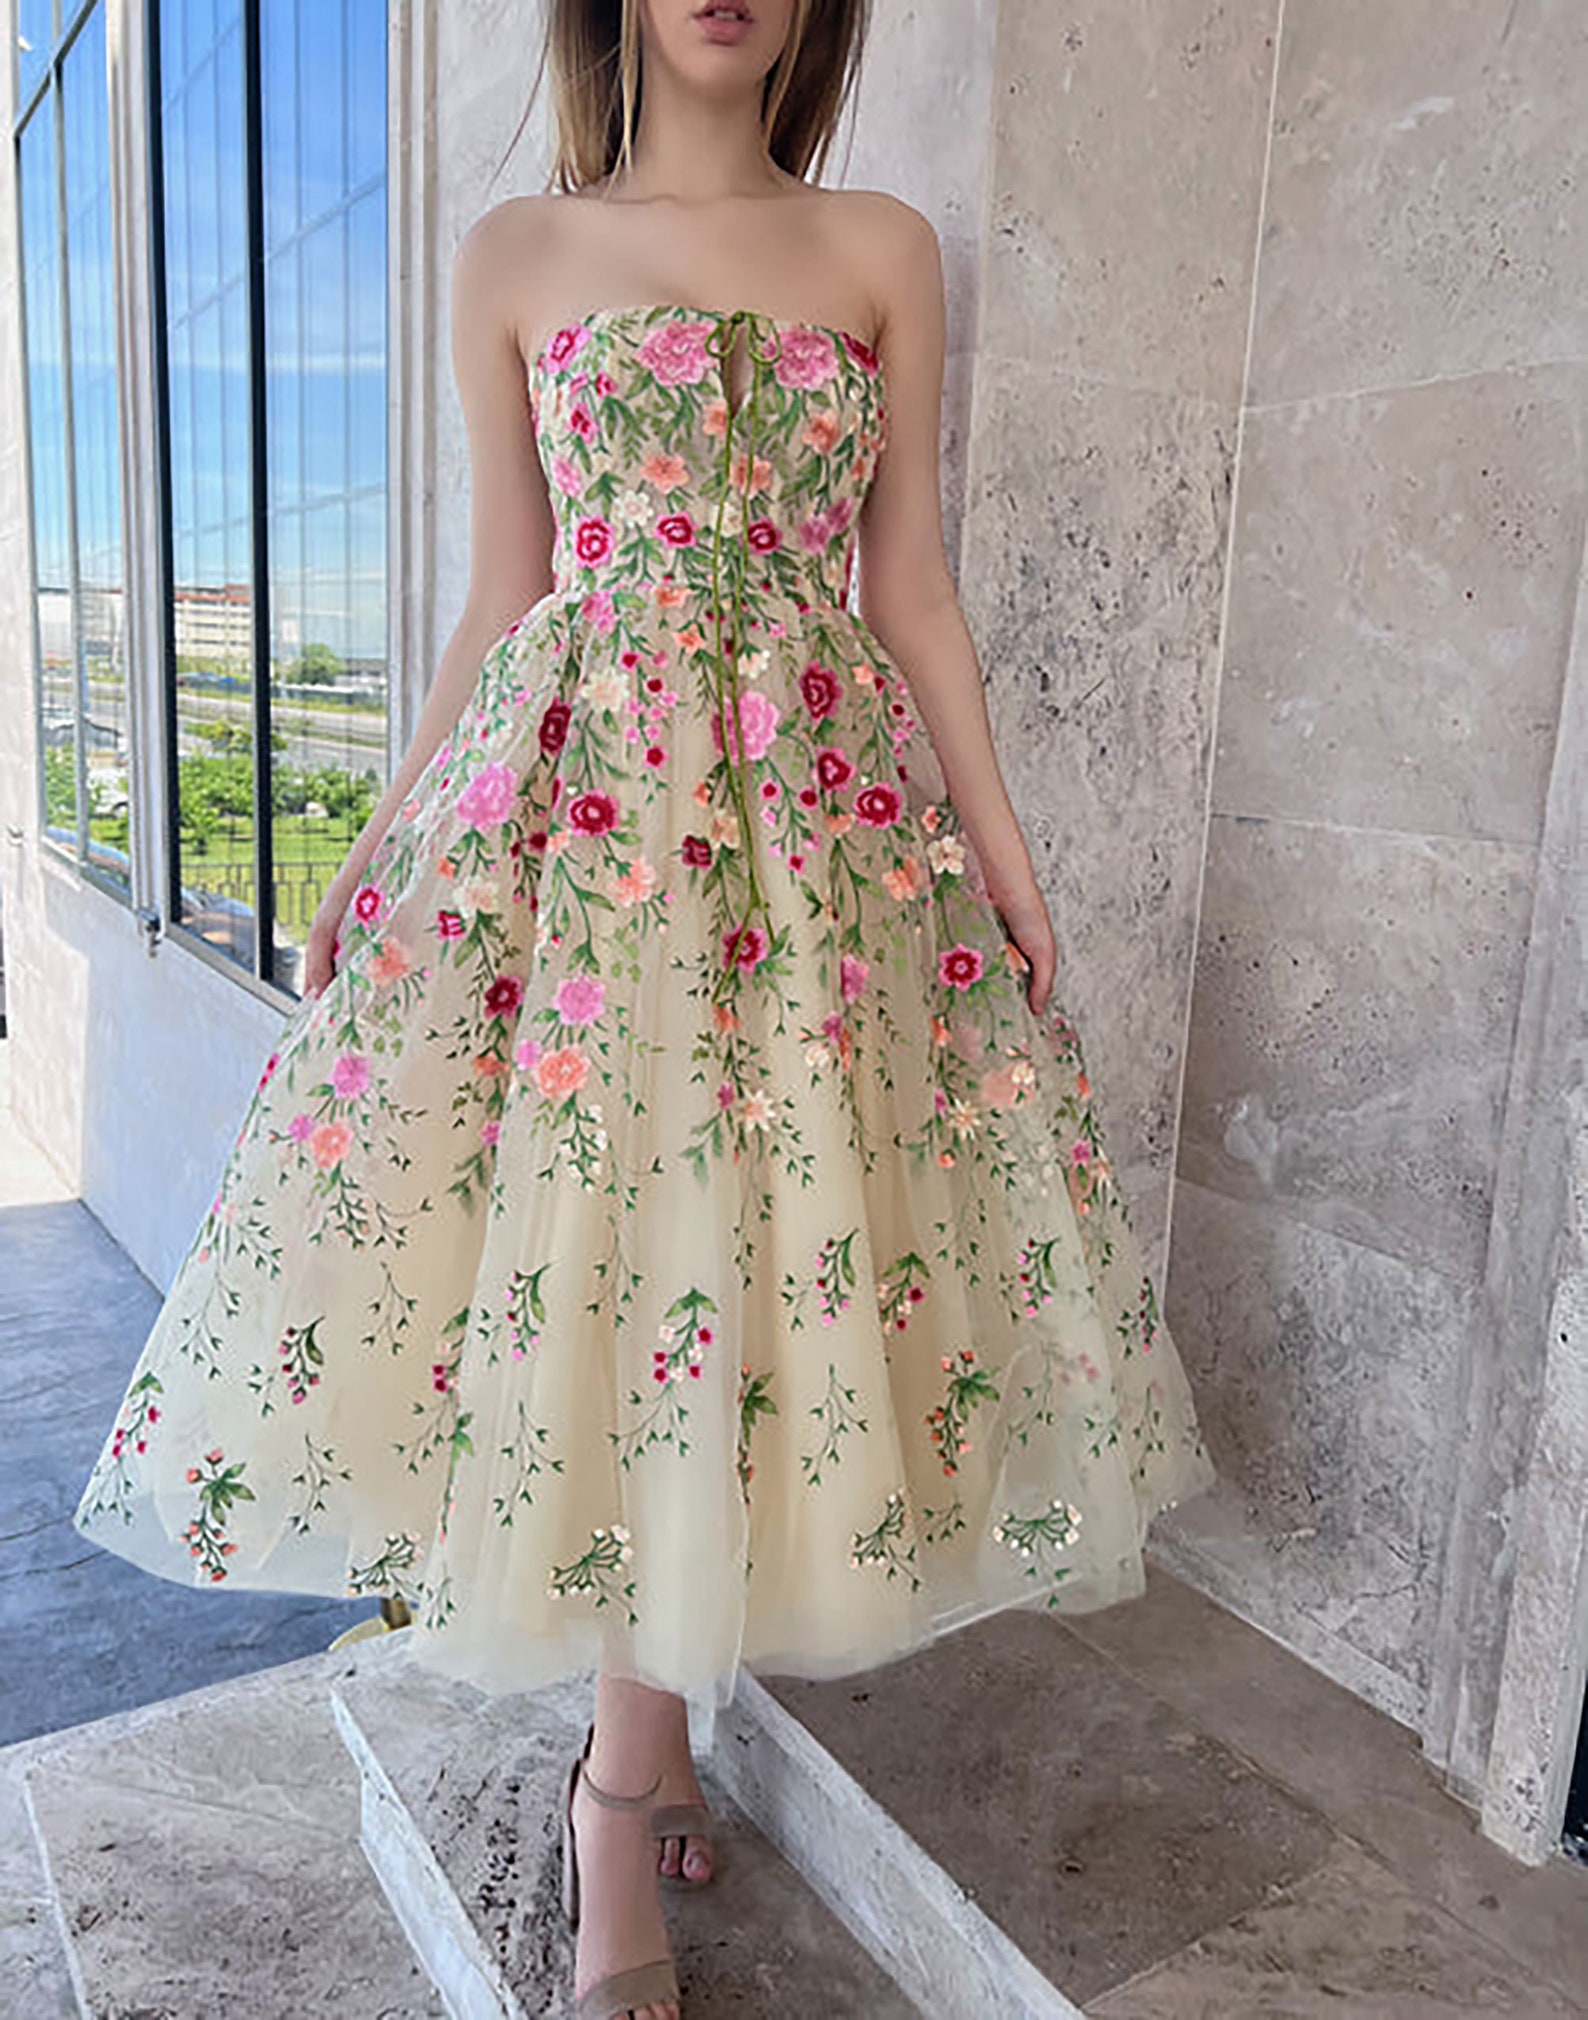 Flower Fairy Lace Dress A Line Embroidery Lace Prom Dress - Etsy